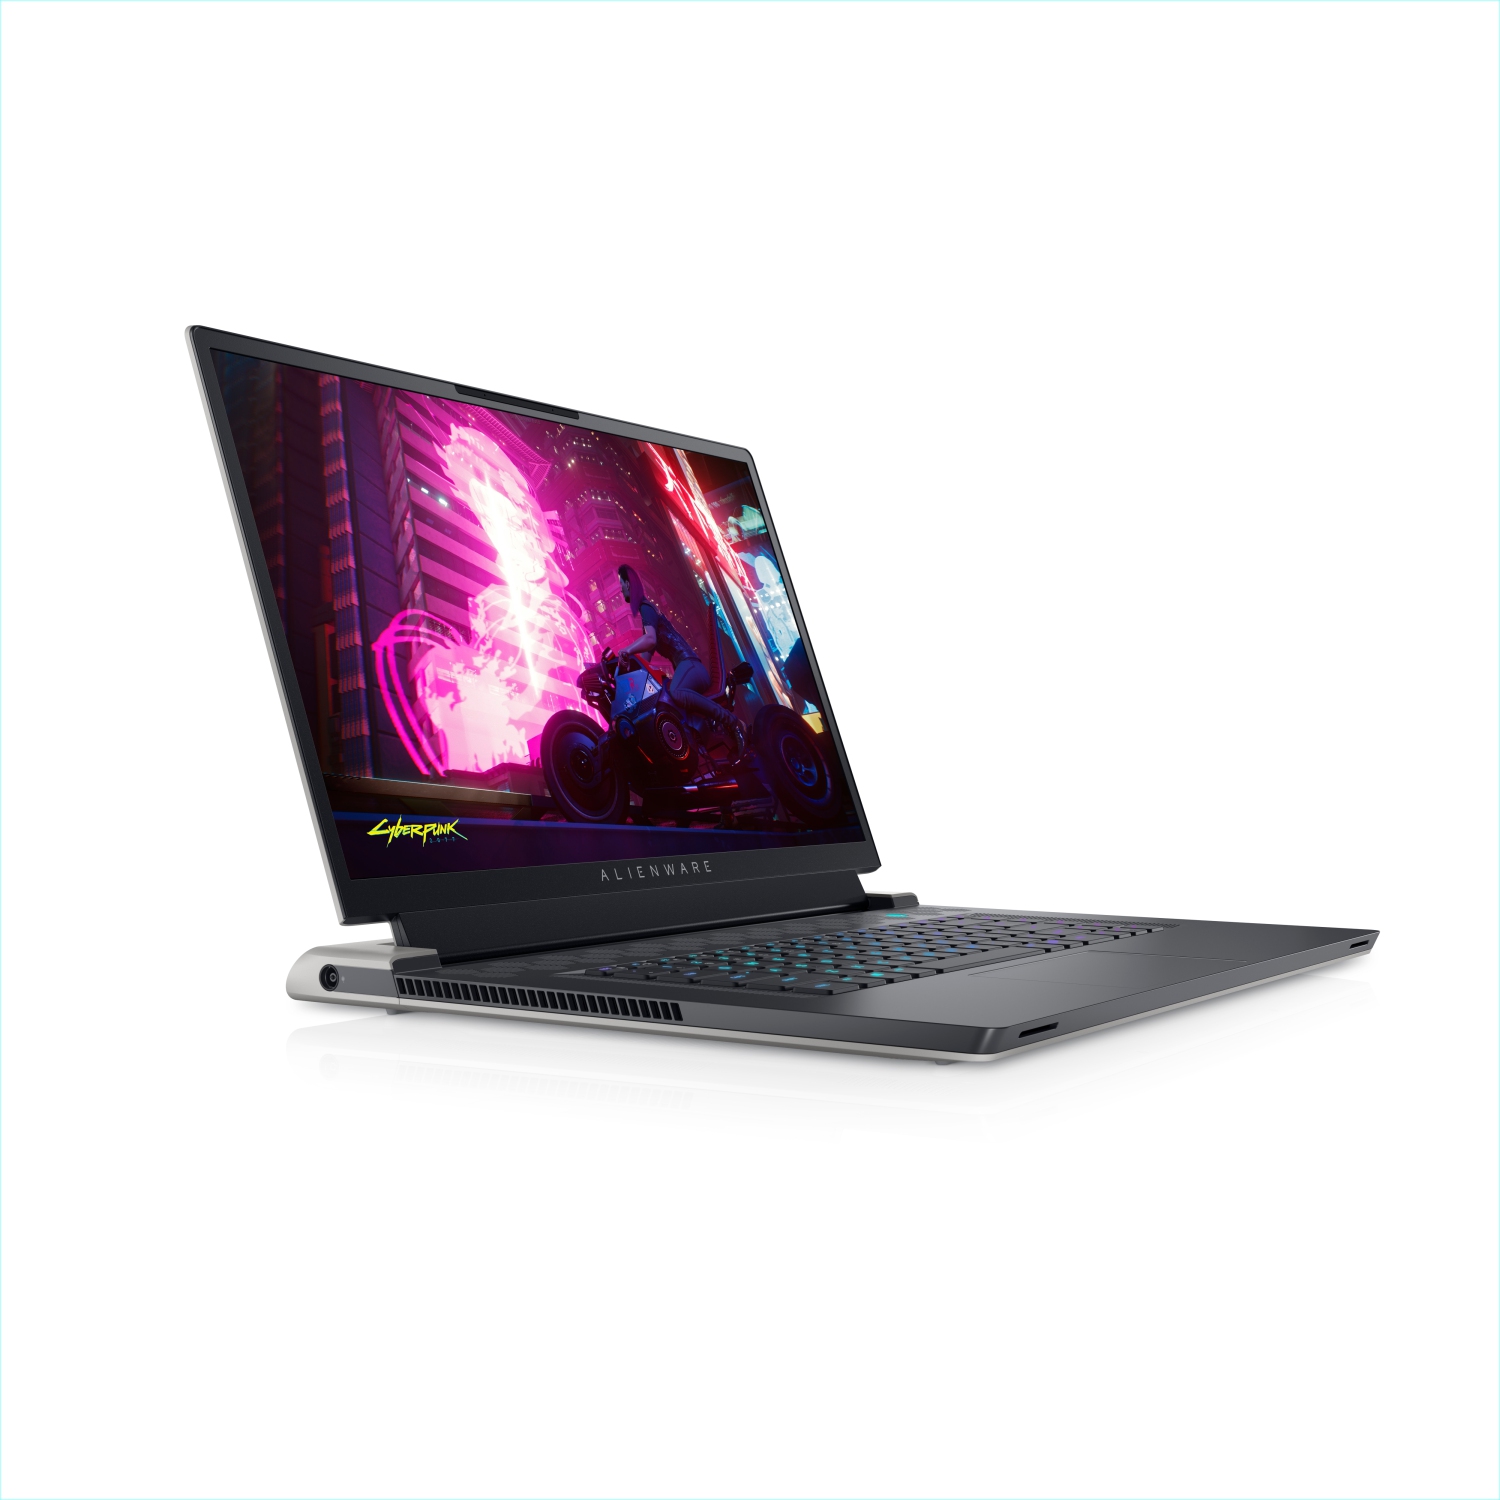 Refurbished (Excellent) - Dell Alienware X17 R1 Gaming Laptop (2021), 17.3" 4K, Core i7, 256GB SSD, 16GB RAM, RTX 3070, 8 Cores @ 4.6 GHz, 11th Gen CPU Certified